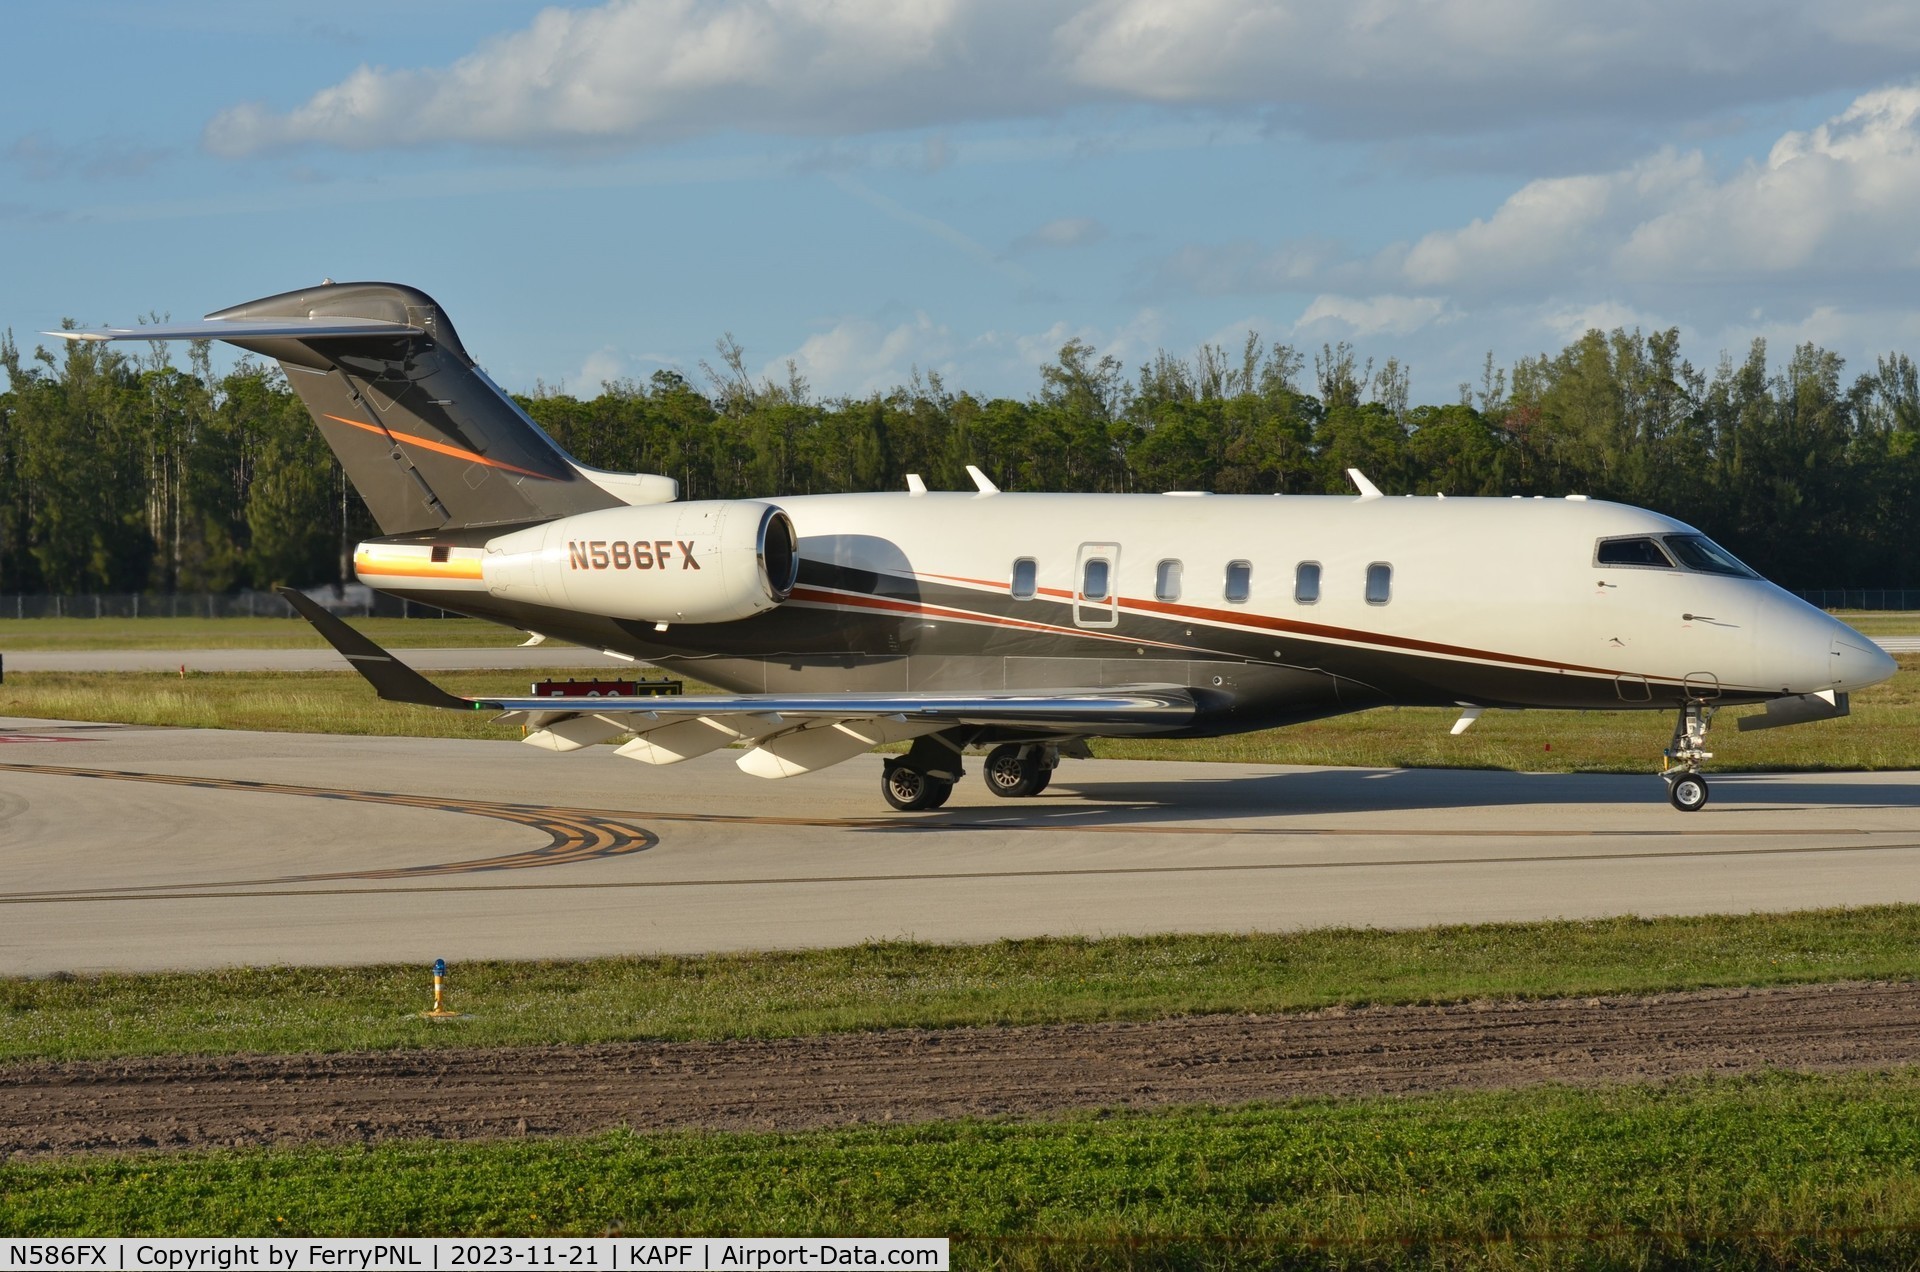 N586FX, 2017 Bombardier Challenger 350 (BD-100-1A10) C/N 20710, Flexjet CL350 vacating the runway.